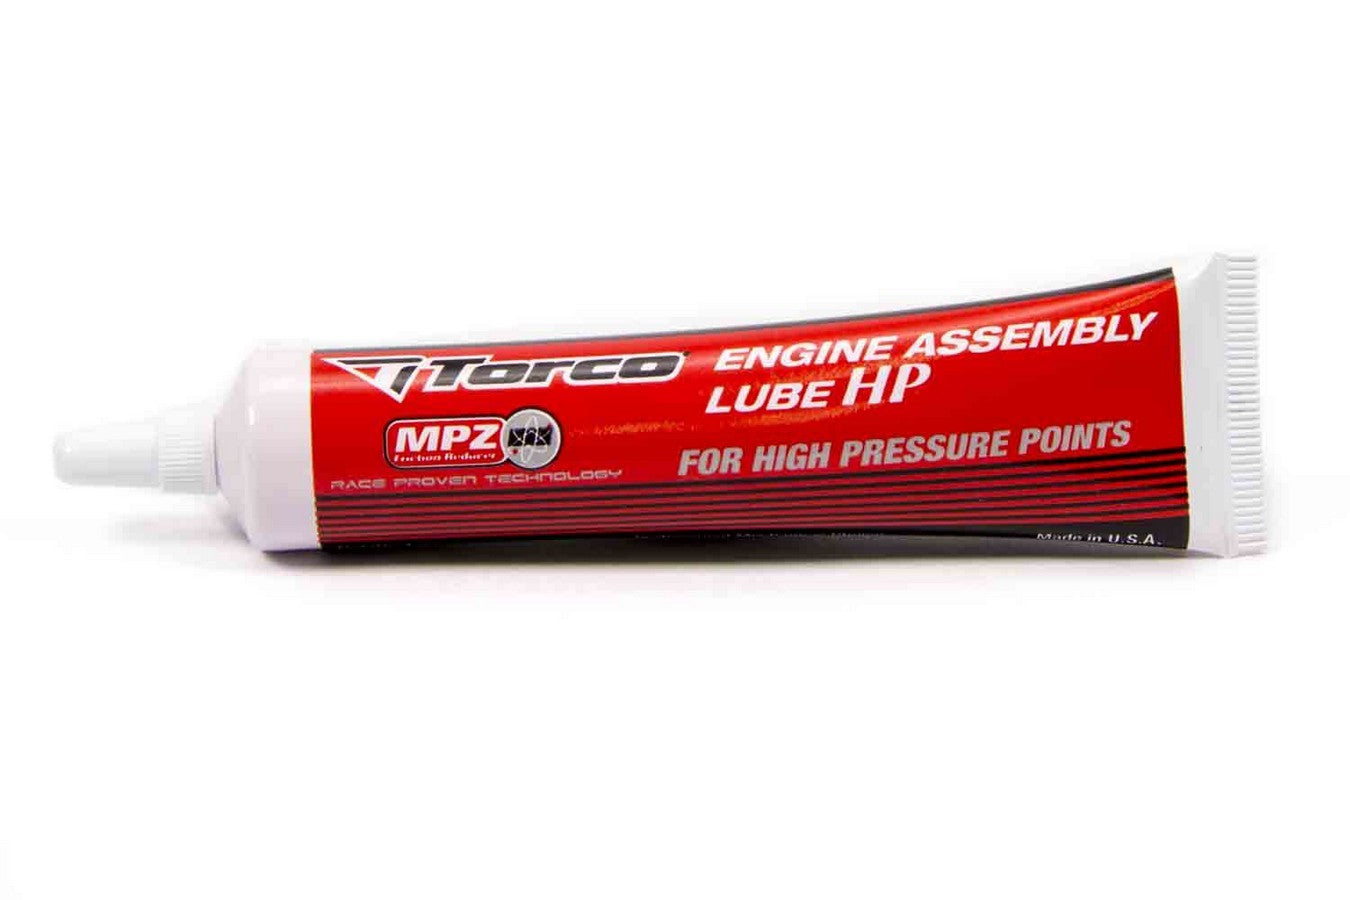 Torco MPZ Engine Assembly Lube HP 1oz Tube TRCA380000HE